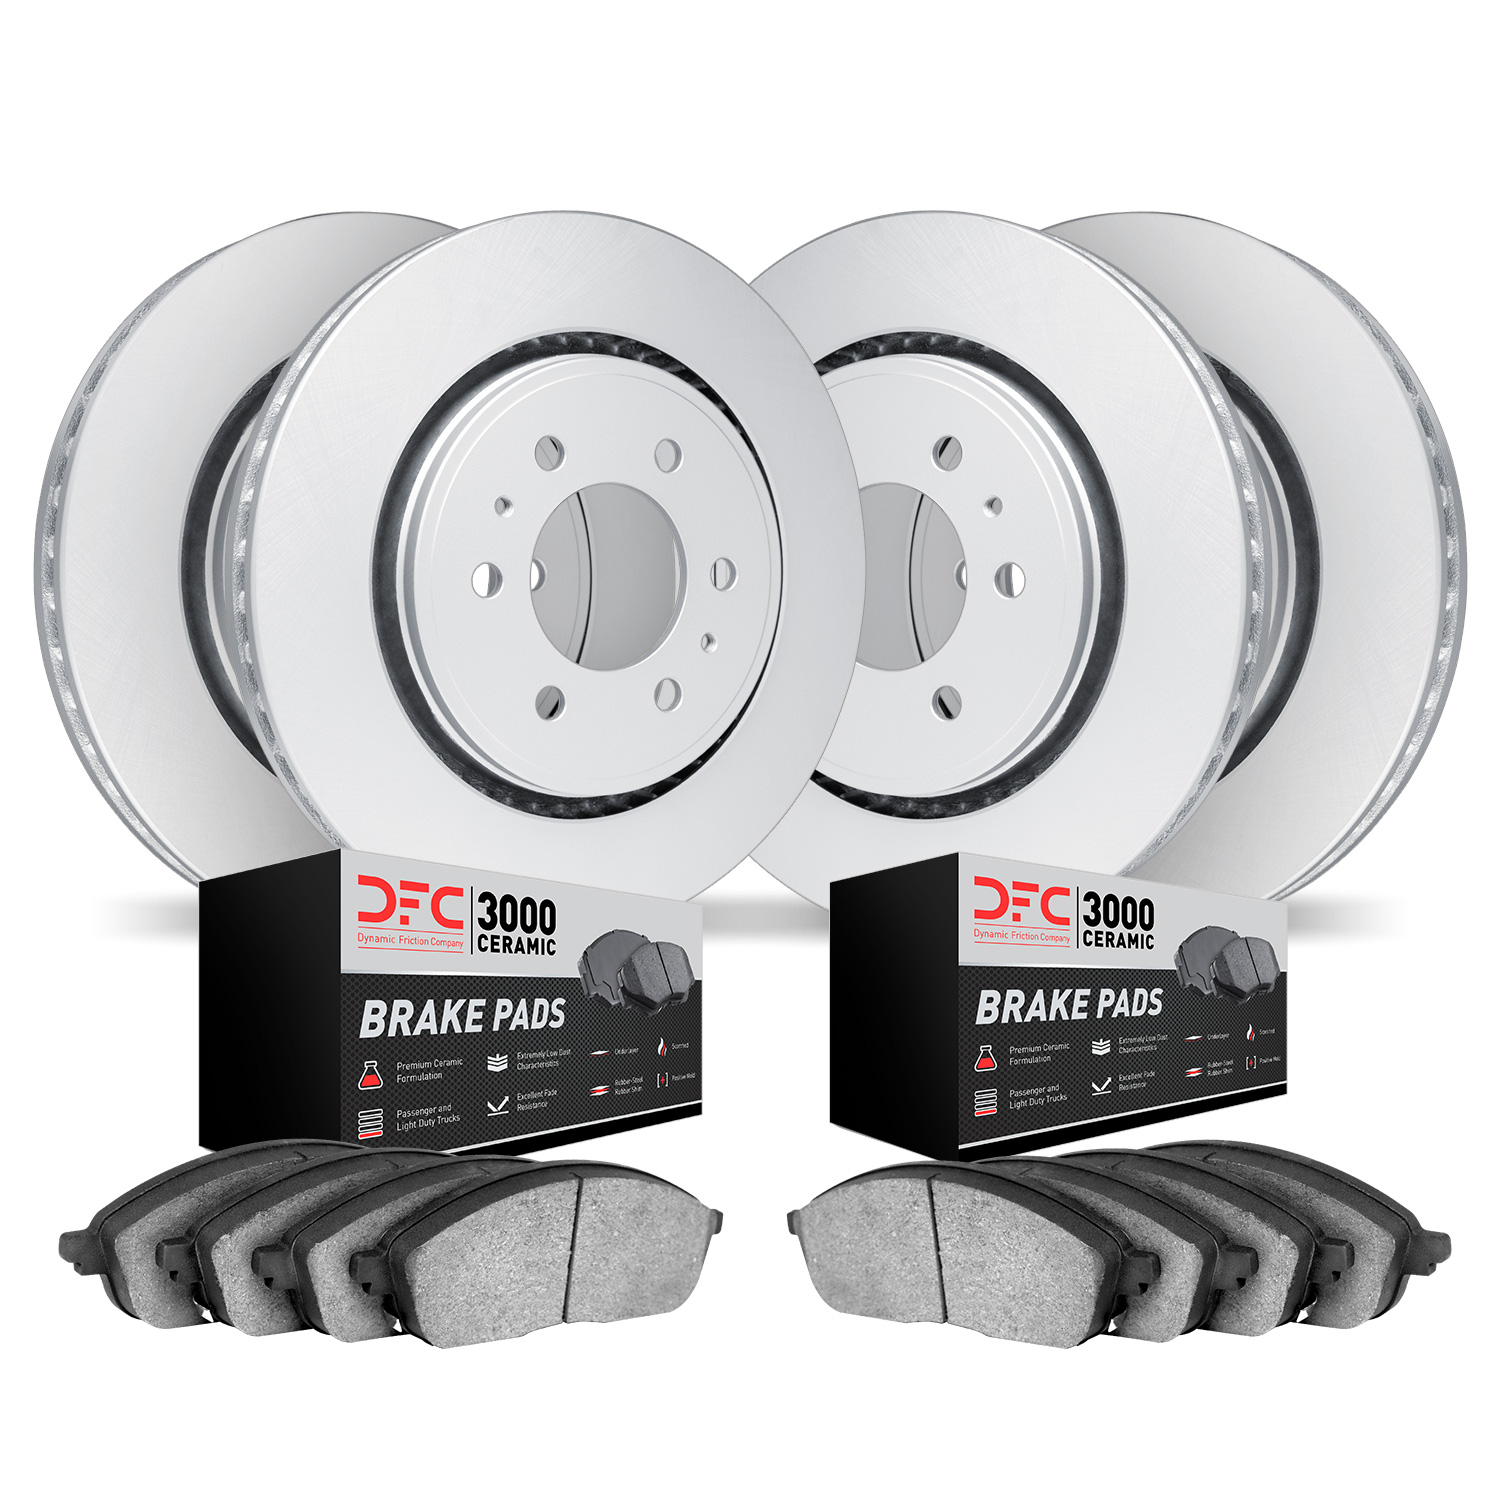 4304-76037 Geospec Brake Rotors with 3000-Series Ceramic Brake Pads Kit, 2003-2009 Lexus/Toyota/Scion, Position: Front and Rear